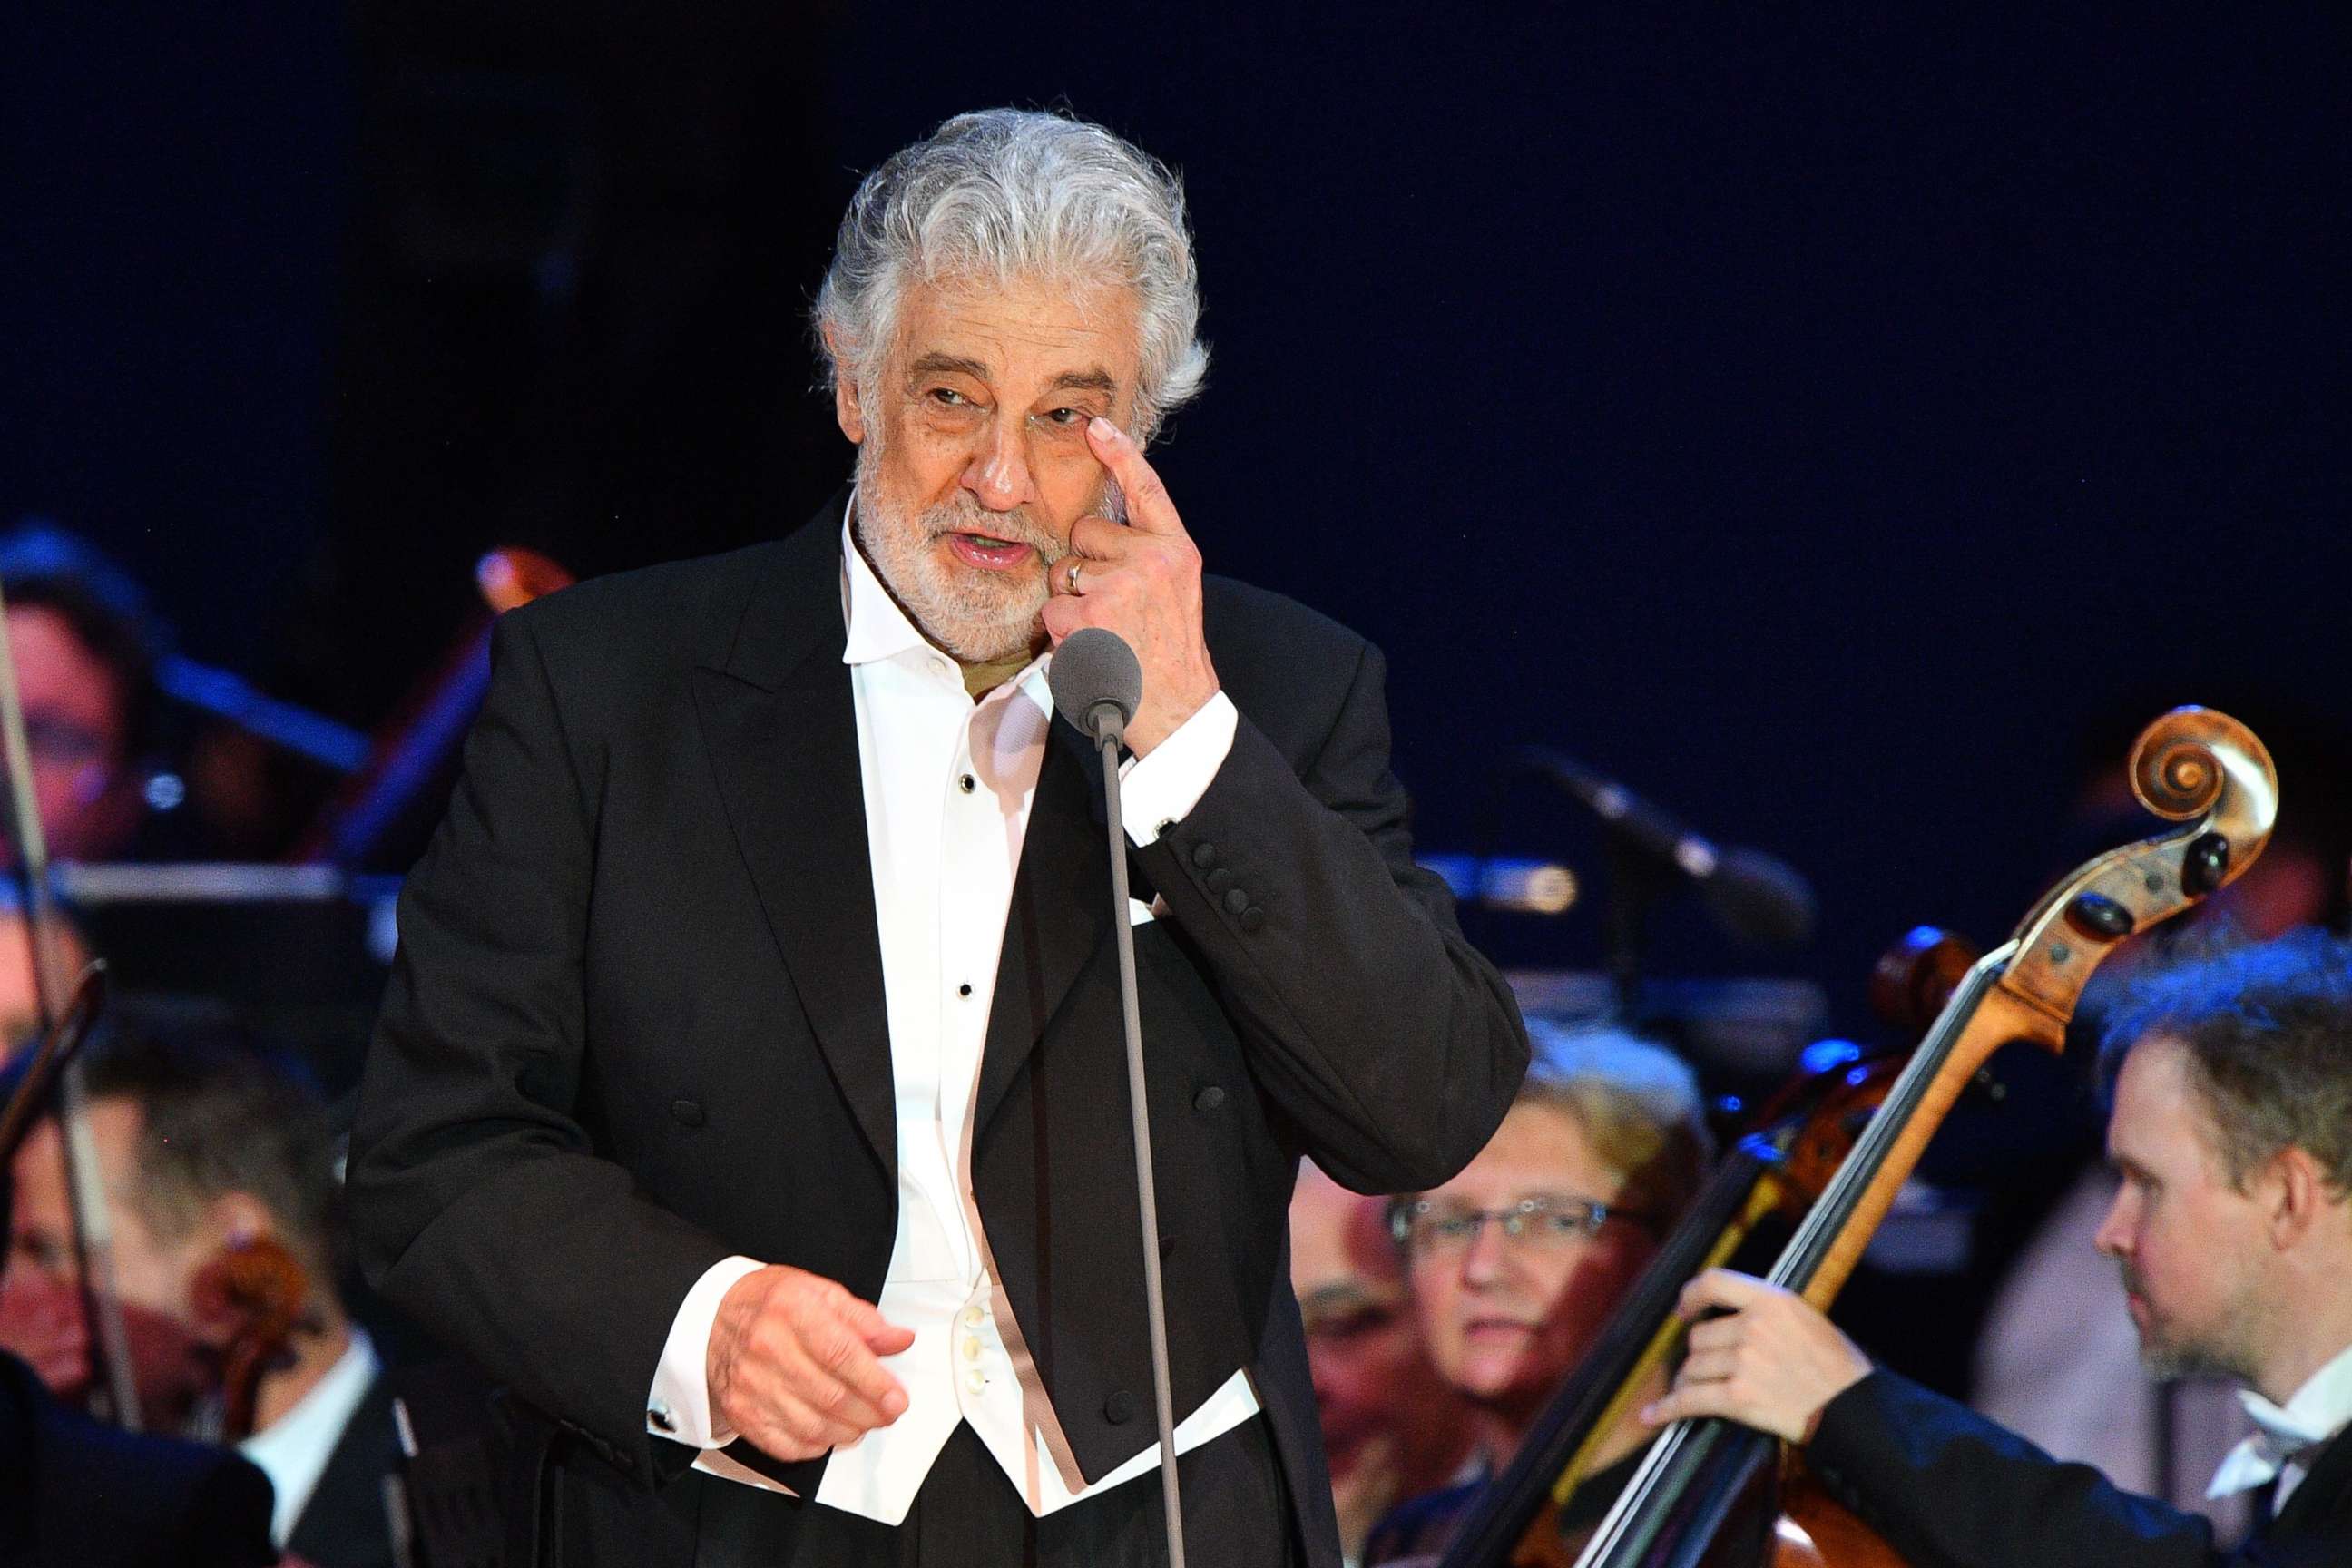 PHOTO: Spanish tenor Placido Domingo gestures as he performs during his concert in Szeged, southern Hungary, on Aug. 28, 2019.